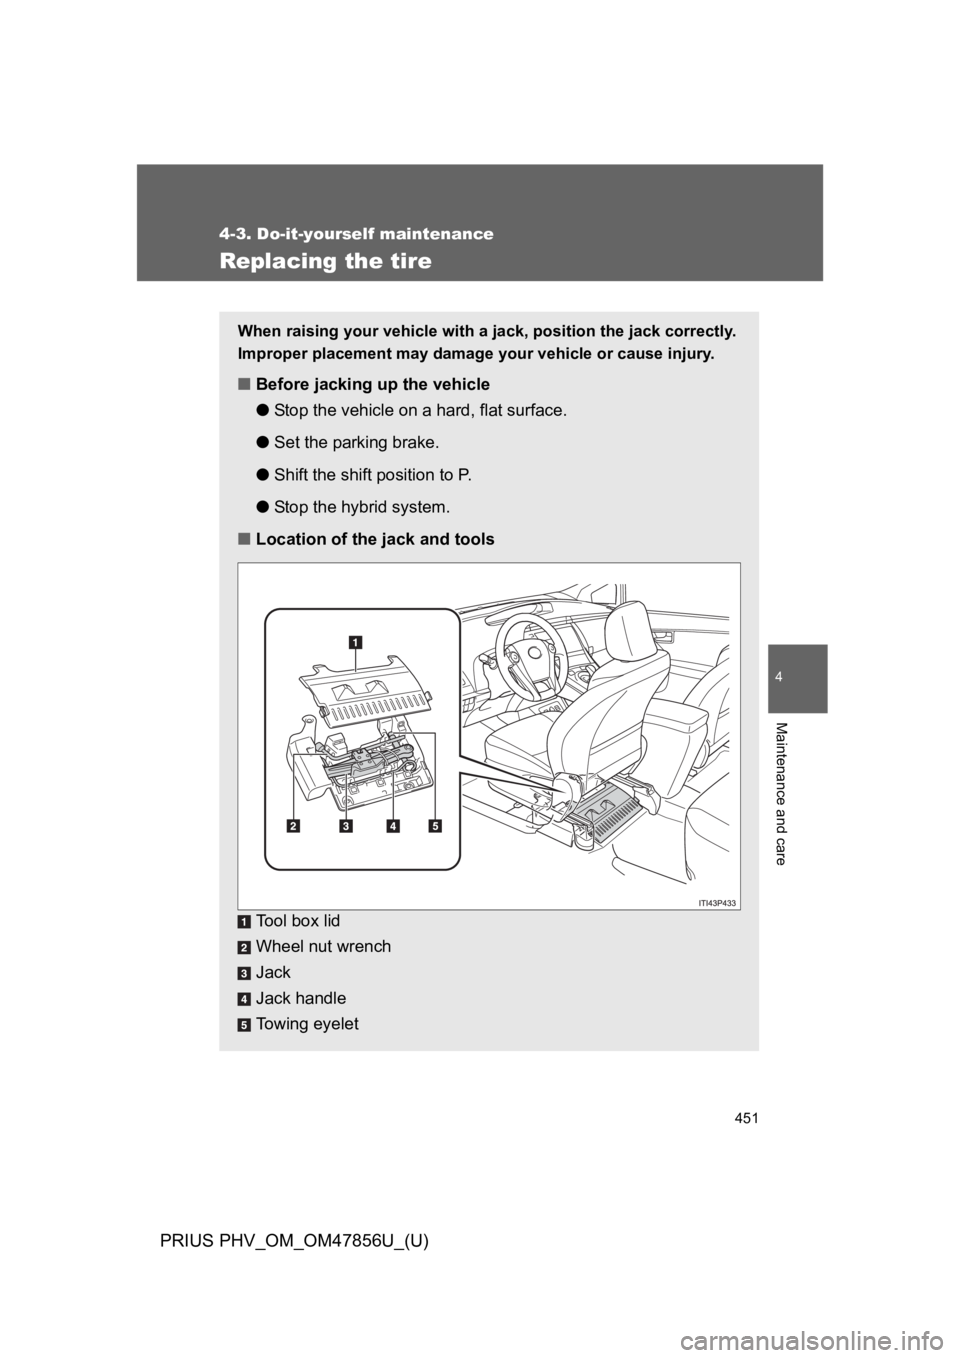 TOYOTA PRIUS PLUG-IN 2014  Owners Manual 451
4-3. Do-it-yourself maintenance
PRIUS PHV_OM_OM47856U_(U)
4
Maintenance and care
Replacing the tire
When raising your vehicle with a jack, position the jack correctly.
Improper placement may damag